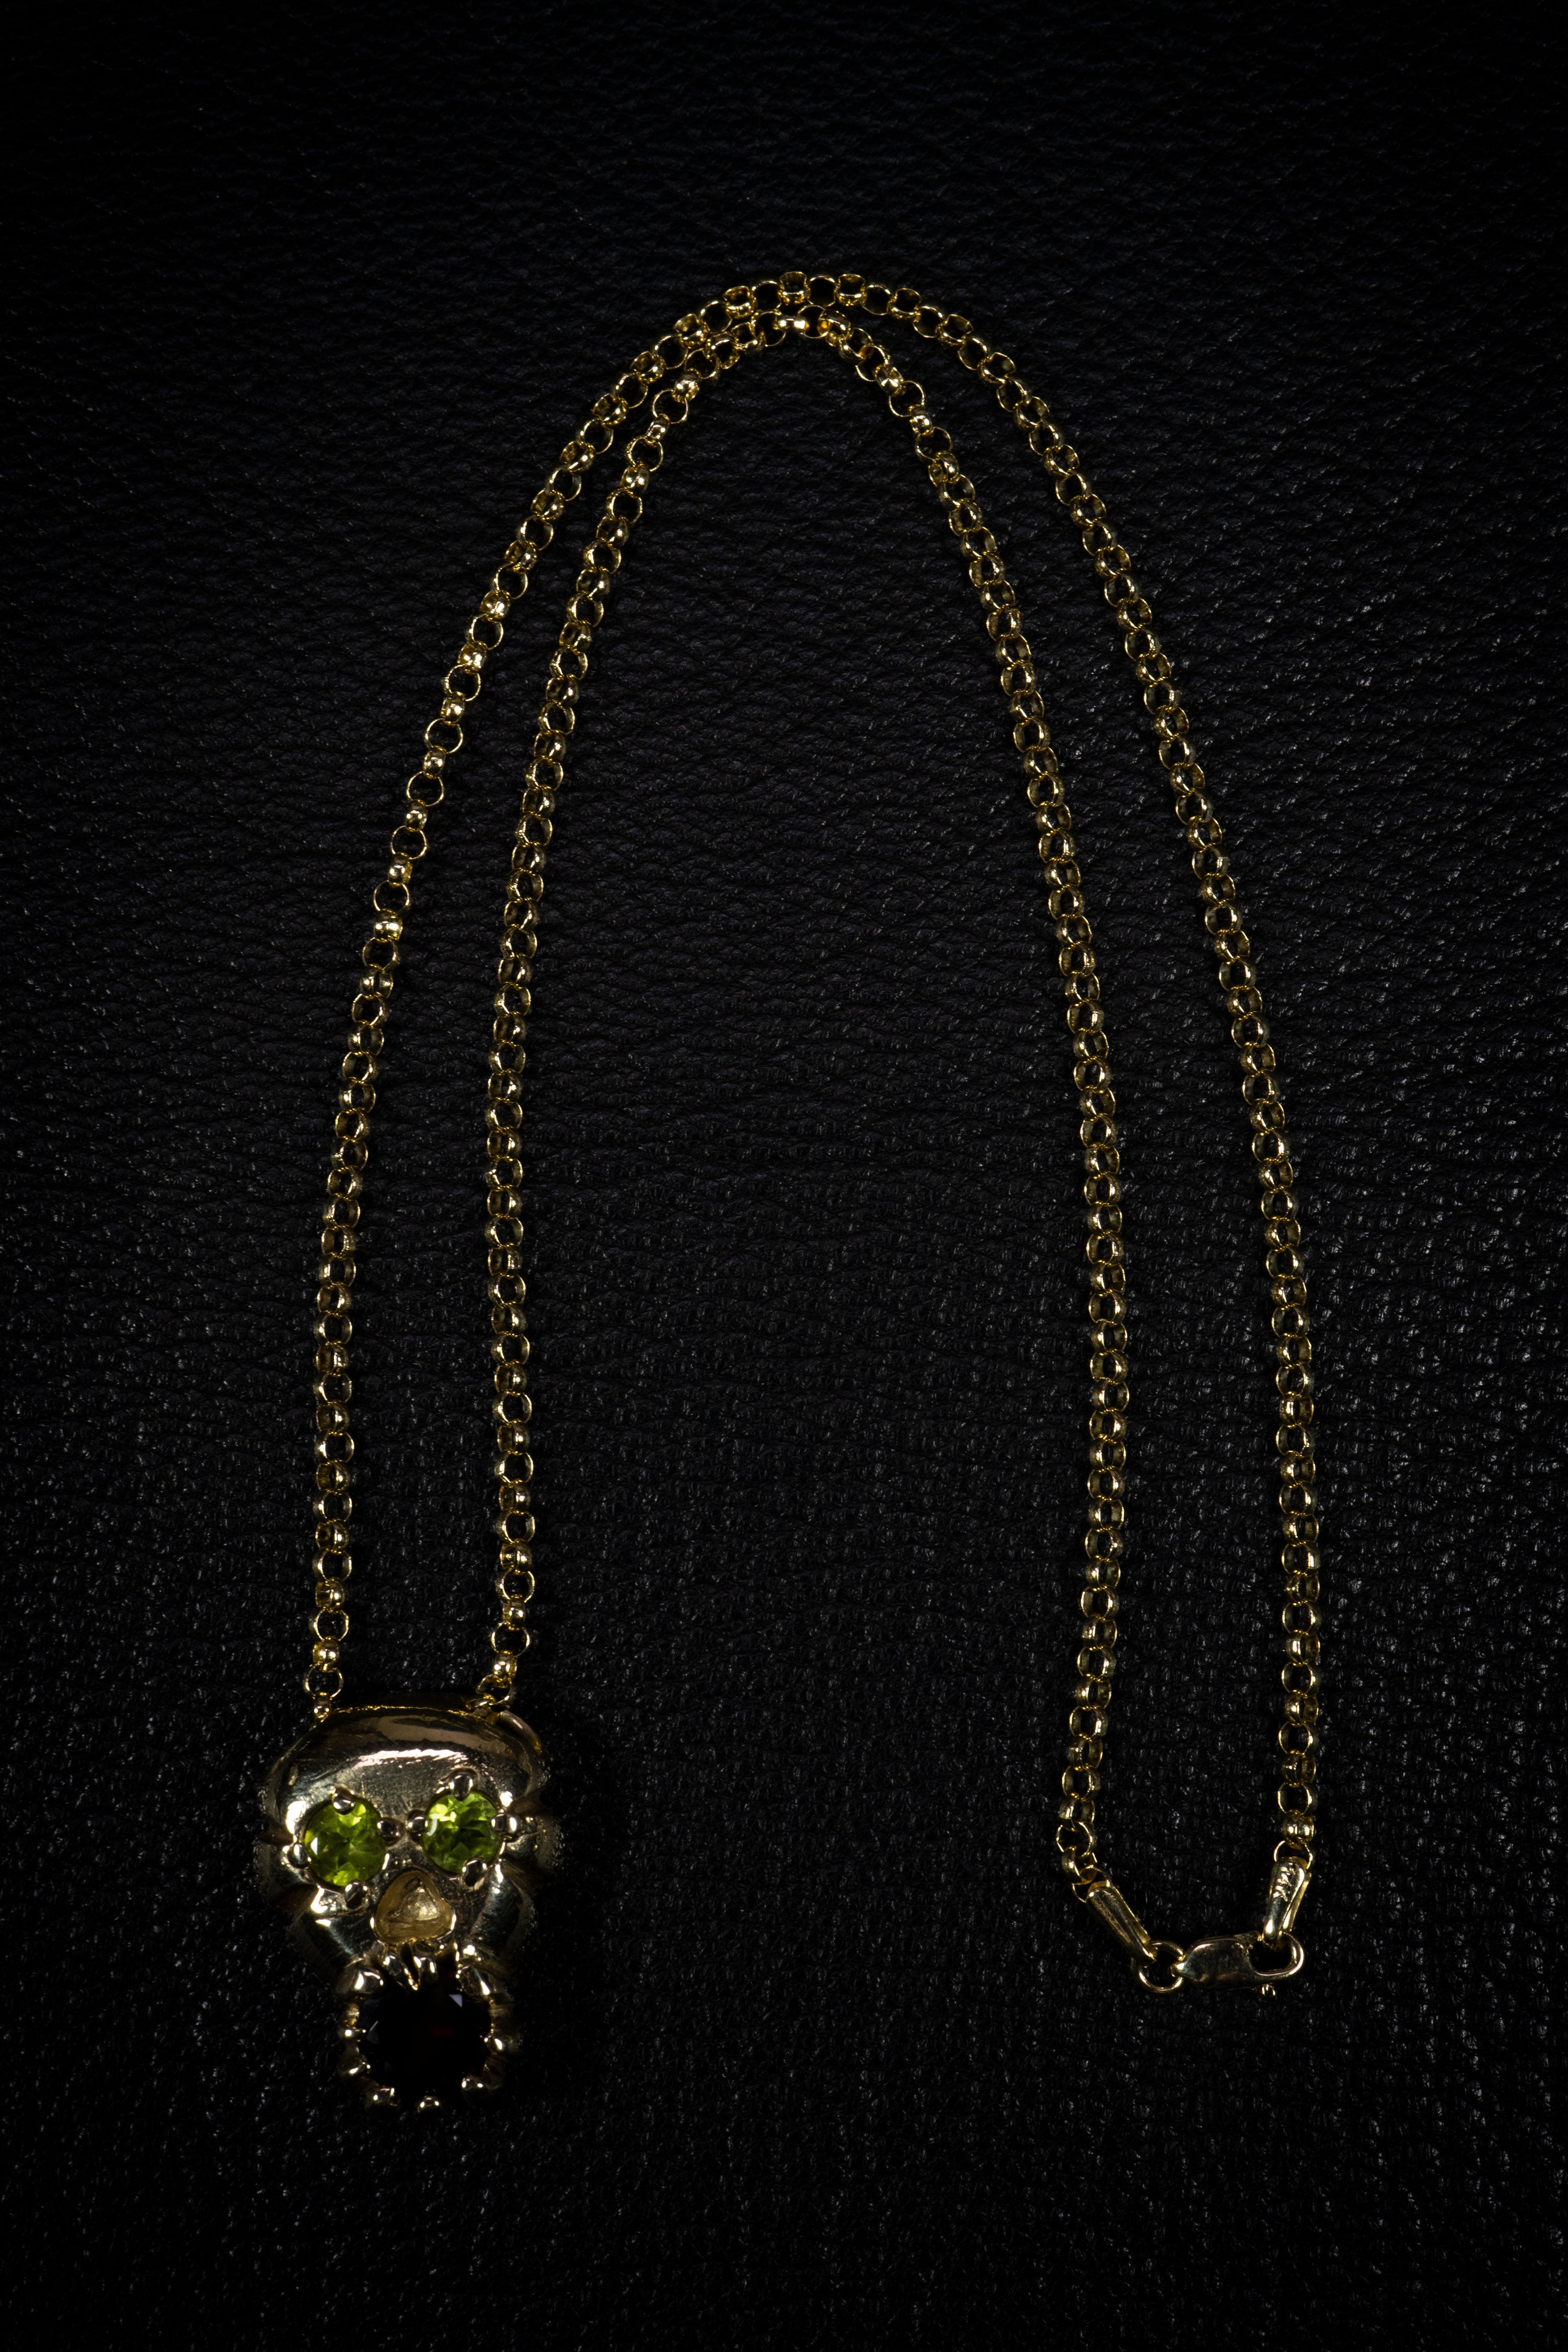 Antique Victorian 9.32Ct Peridot and Seed Pearl 15k Yellow Gold Necklace |  eBay